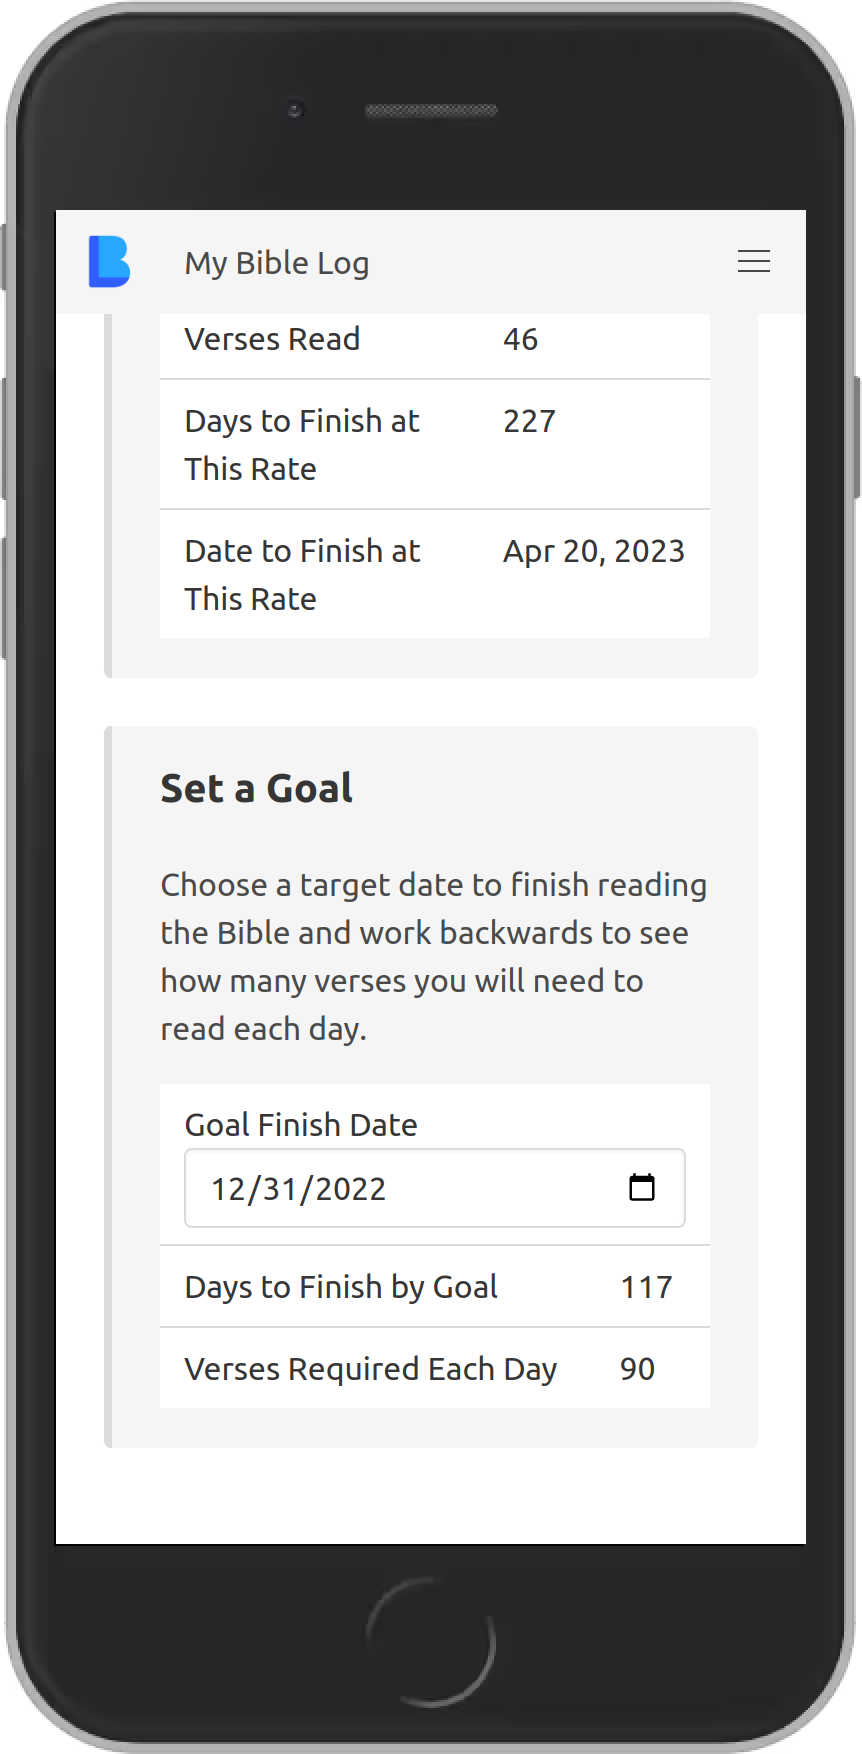 My Bible Log showing reading progress and goal setting features